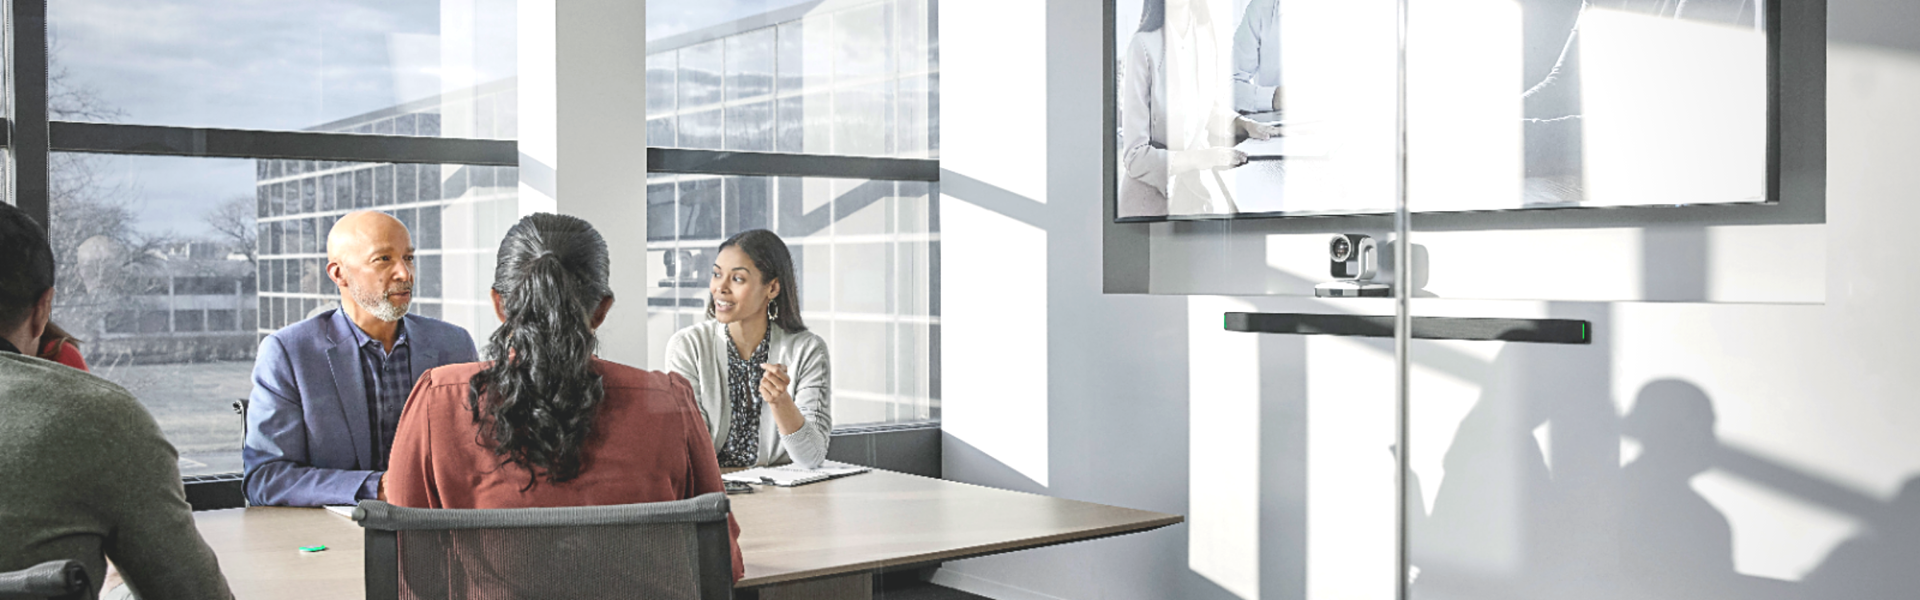 PTH Groep Shure audio voor video conferencing systems